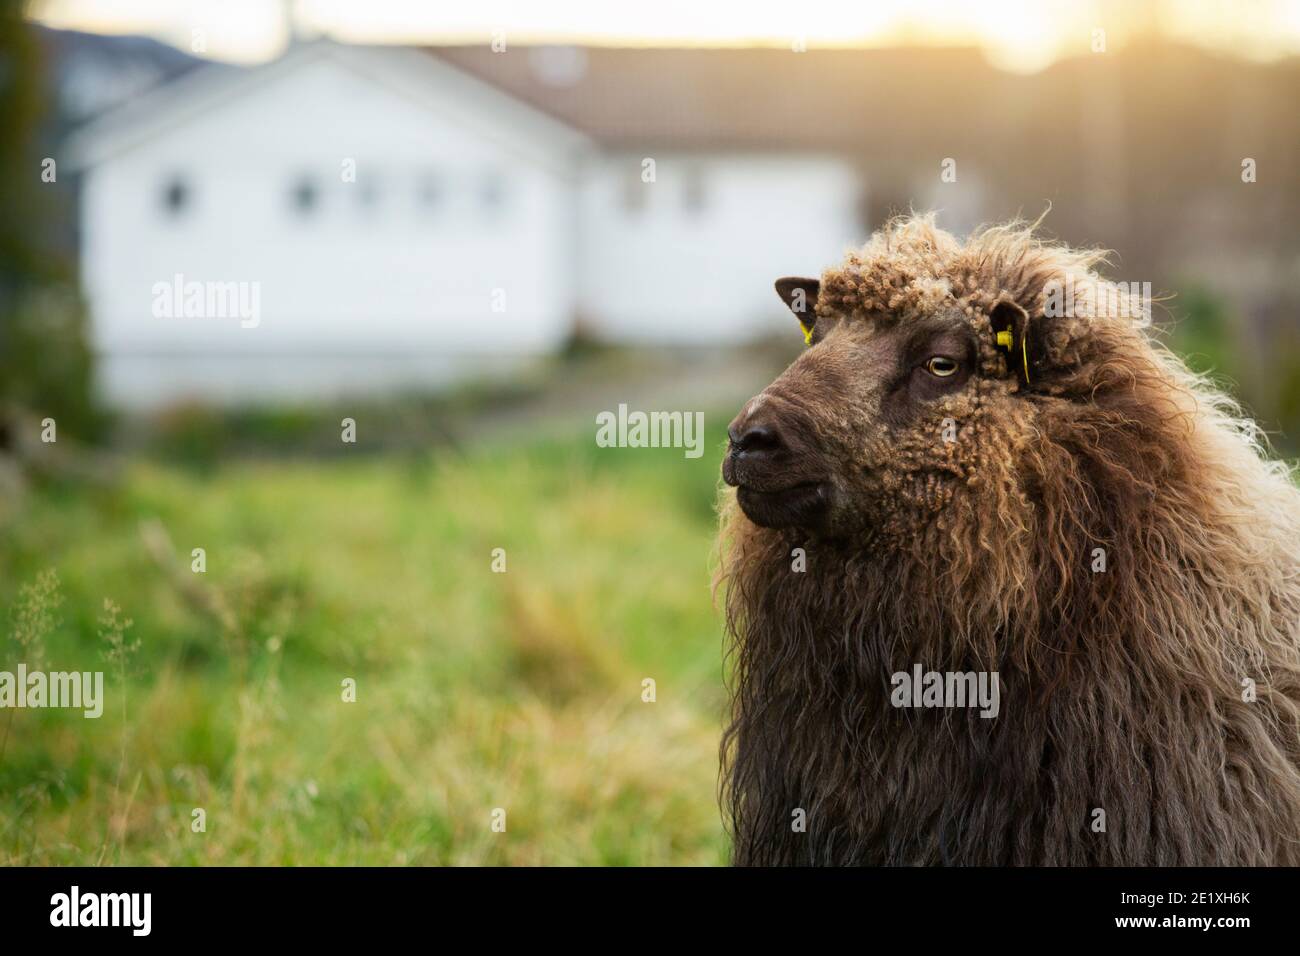 Brown sheep with a RFID transponder in the ear Stock Photo